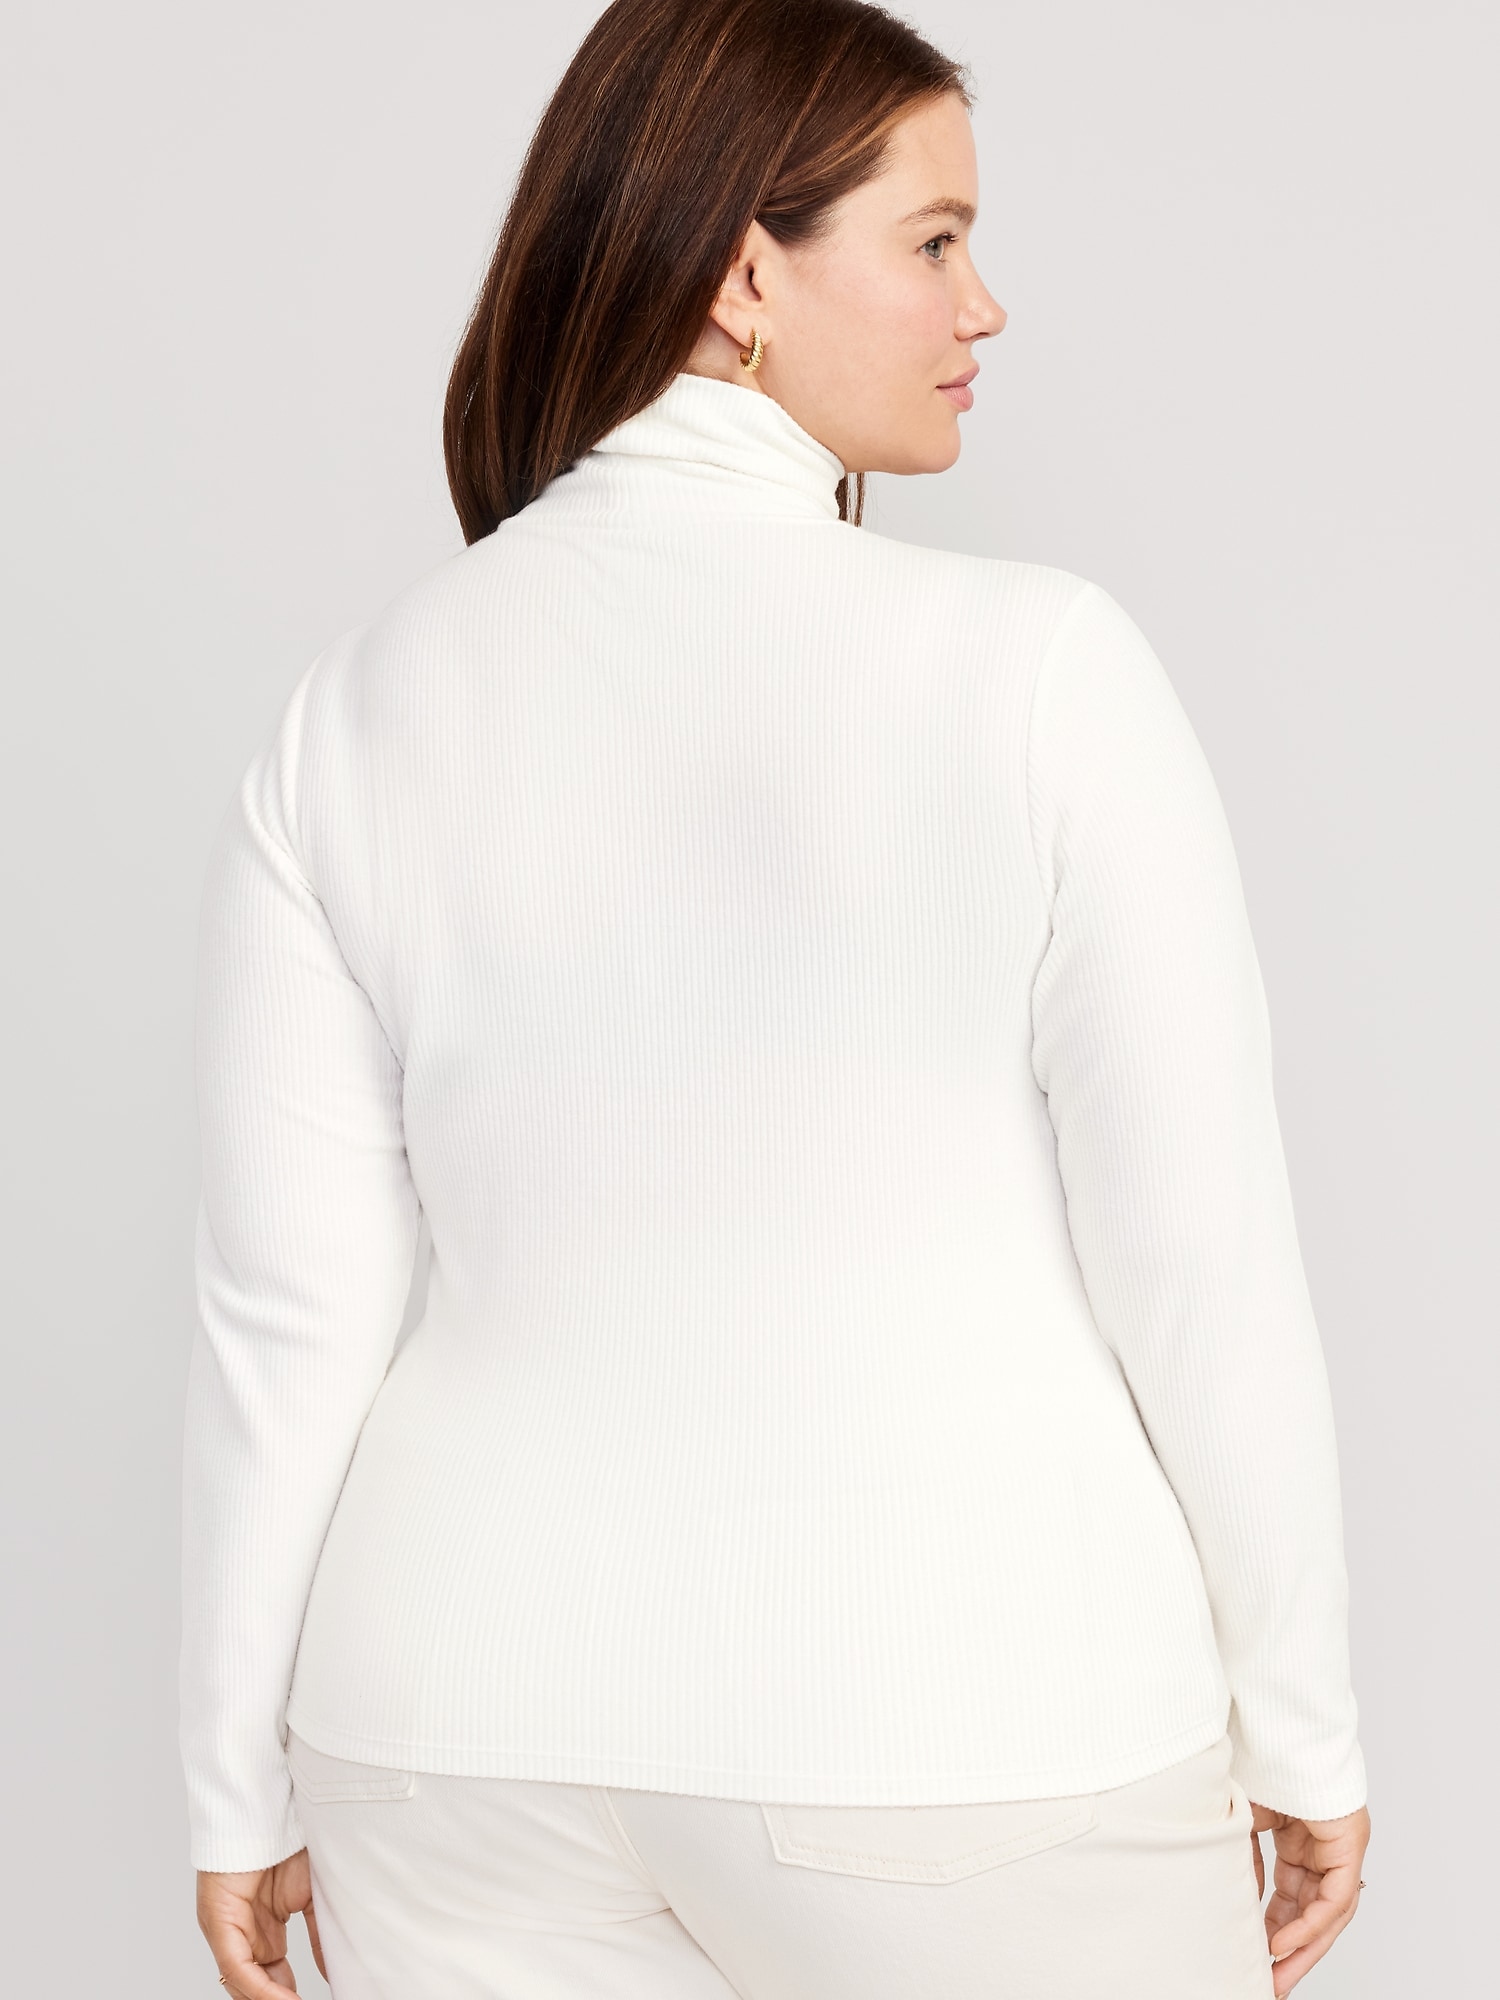 Fitted Plush Rib-Knit Turtleneck for Women | Old Navy